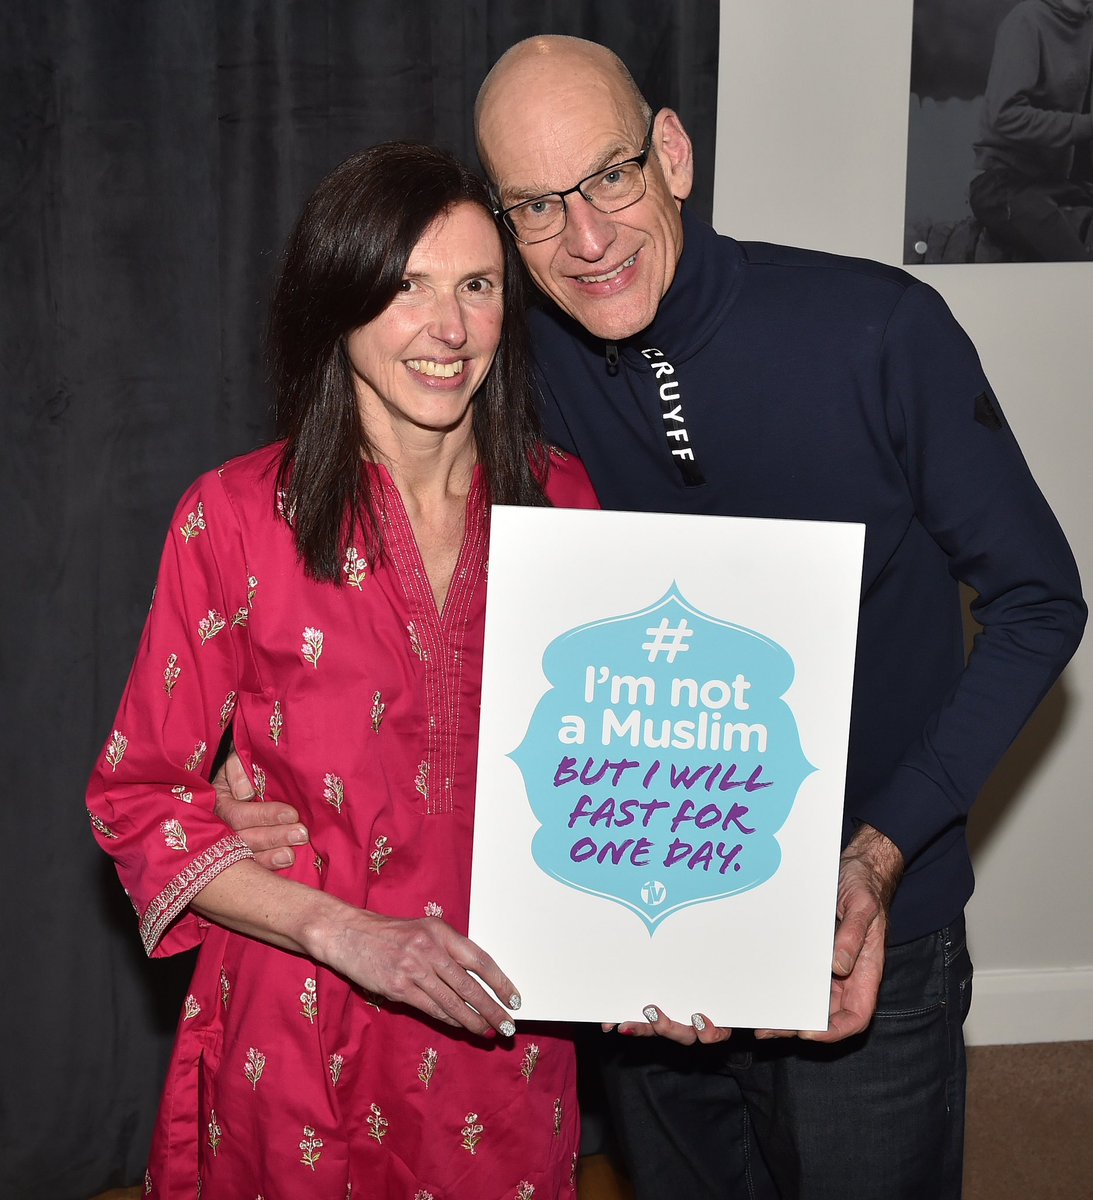 Clive Lawrence and Gill Lawrence took part in our #imnotamuslimbutiwillfastforoneday campaign. 
Clive mentions “Doing the fast for the last few years has been great for building on existing friendships and understanding a little more about the Muslim faith.”
#Ramadan #fasting